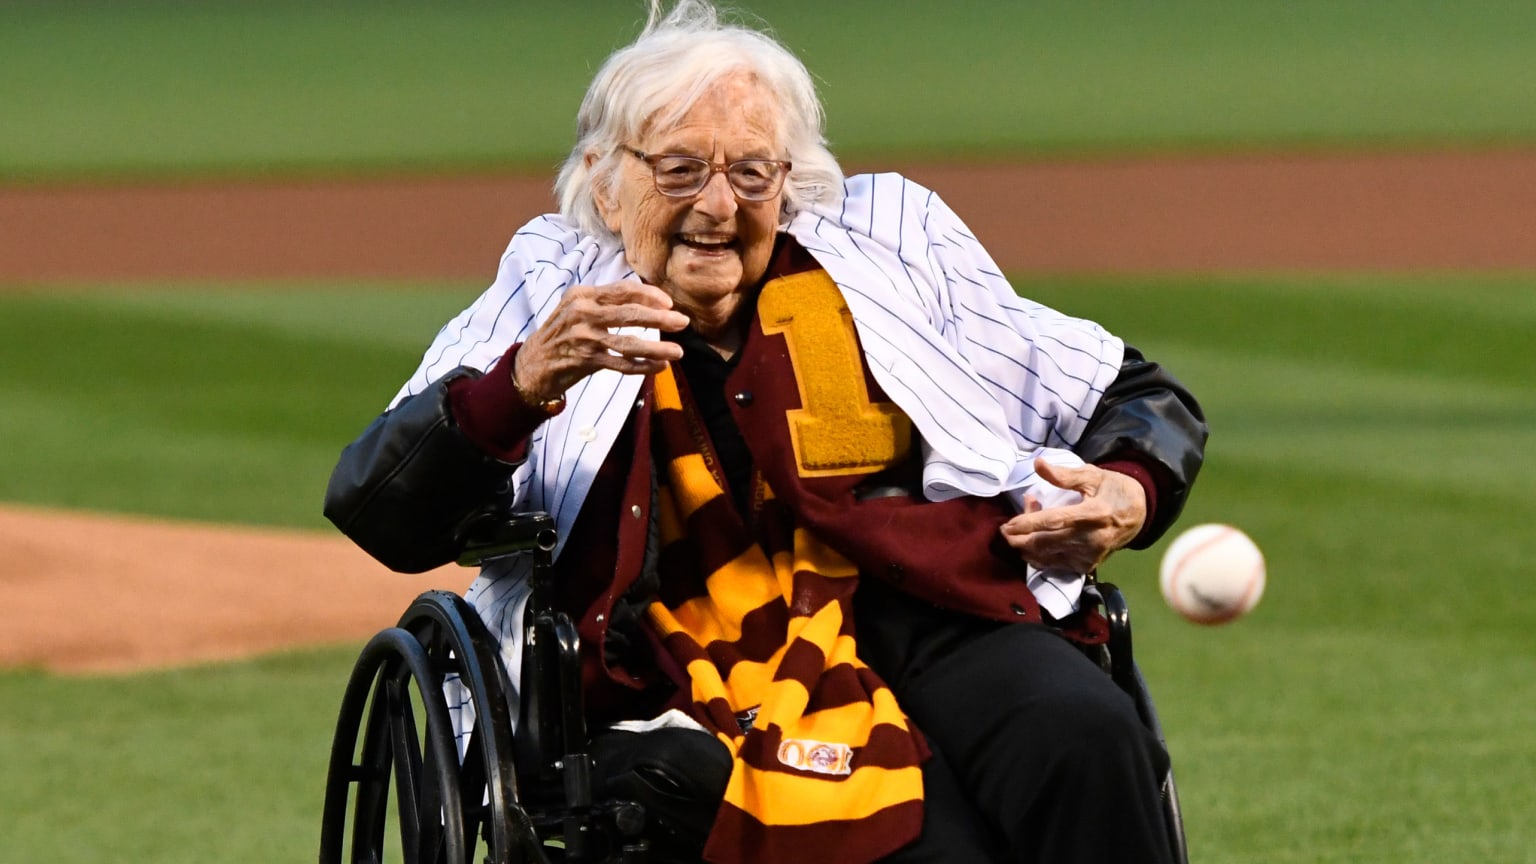 An old woman in a wheelchair wearing a white pinstriped jersey over a maroon-and-gold sweater, smiles while tossing a baseball underhand